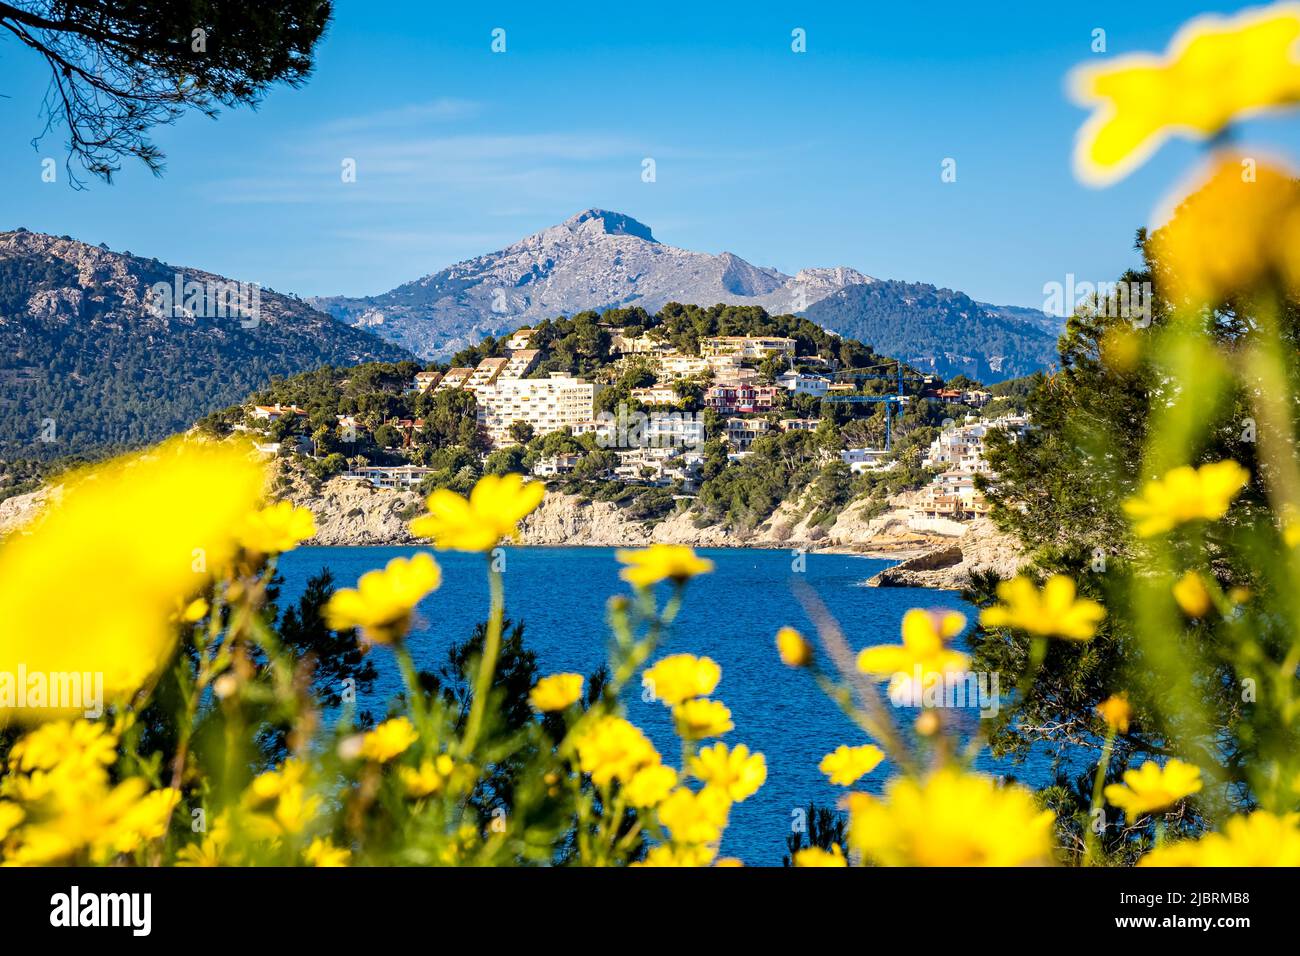 Yellow chamomile in front of the bay Cala de Santa Ponsa with sunlit residential apartment buildings of Costa de la Calma in the background. Stock Photo